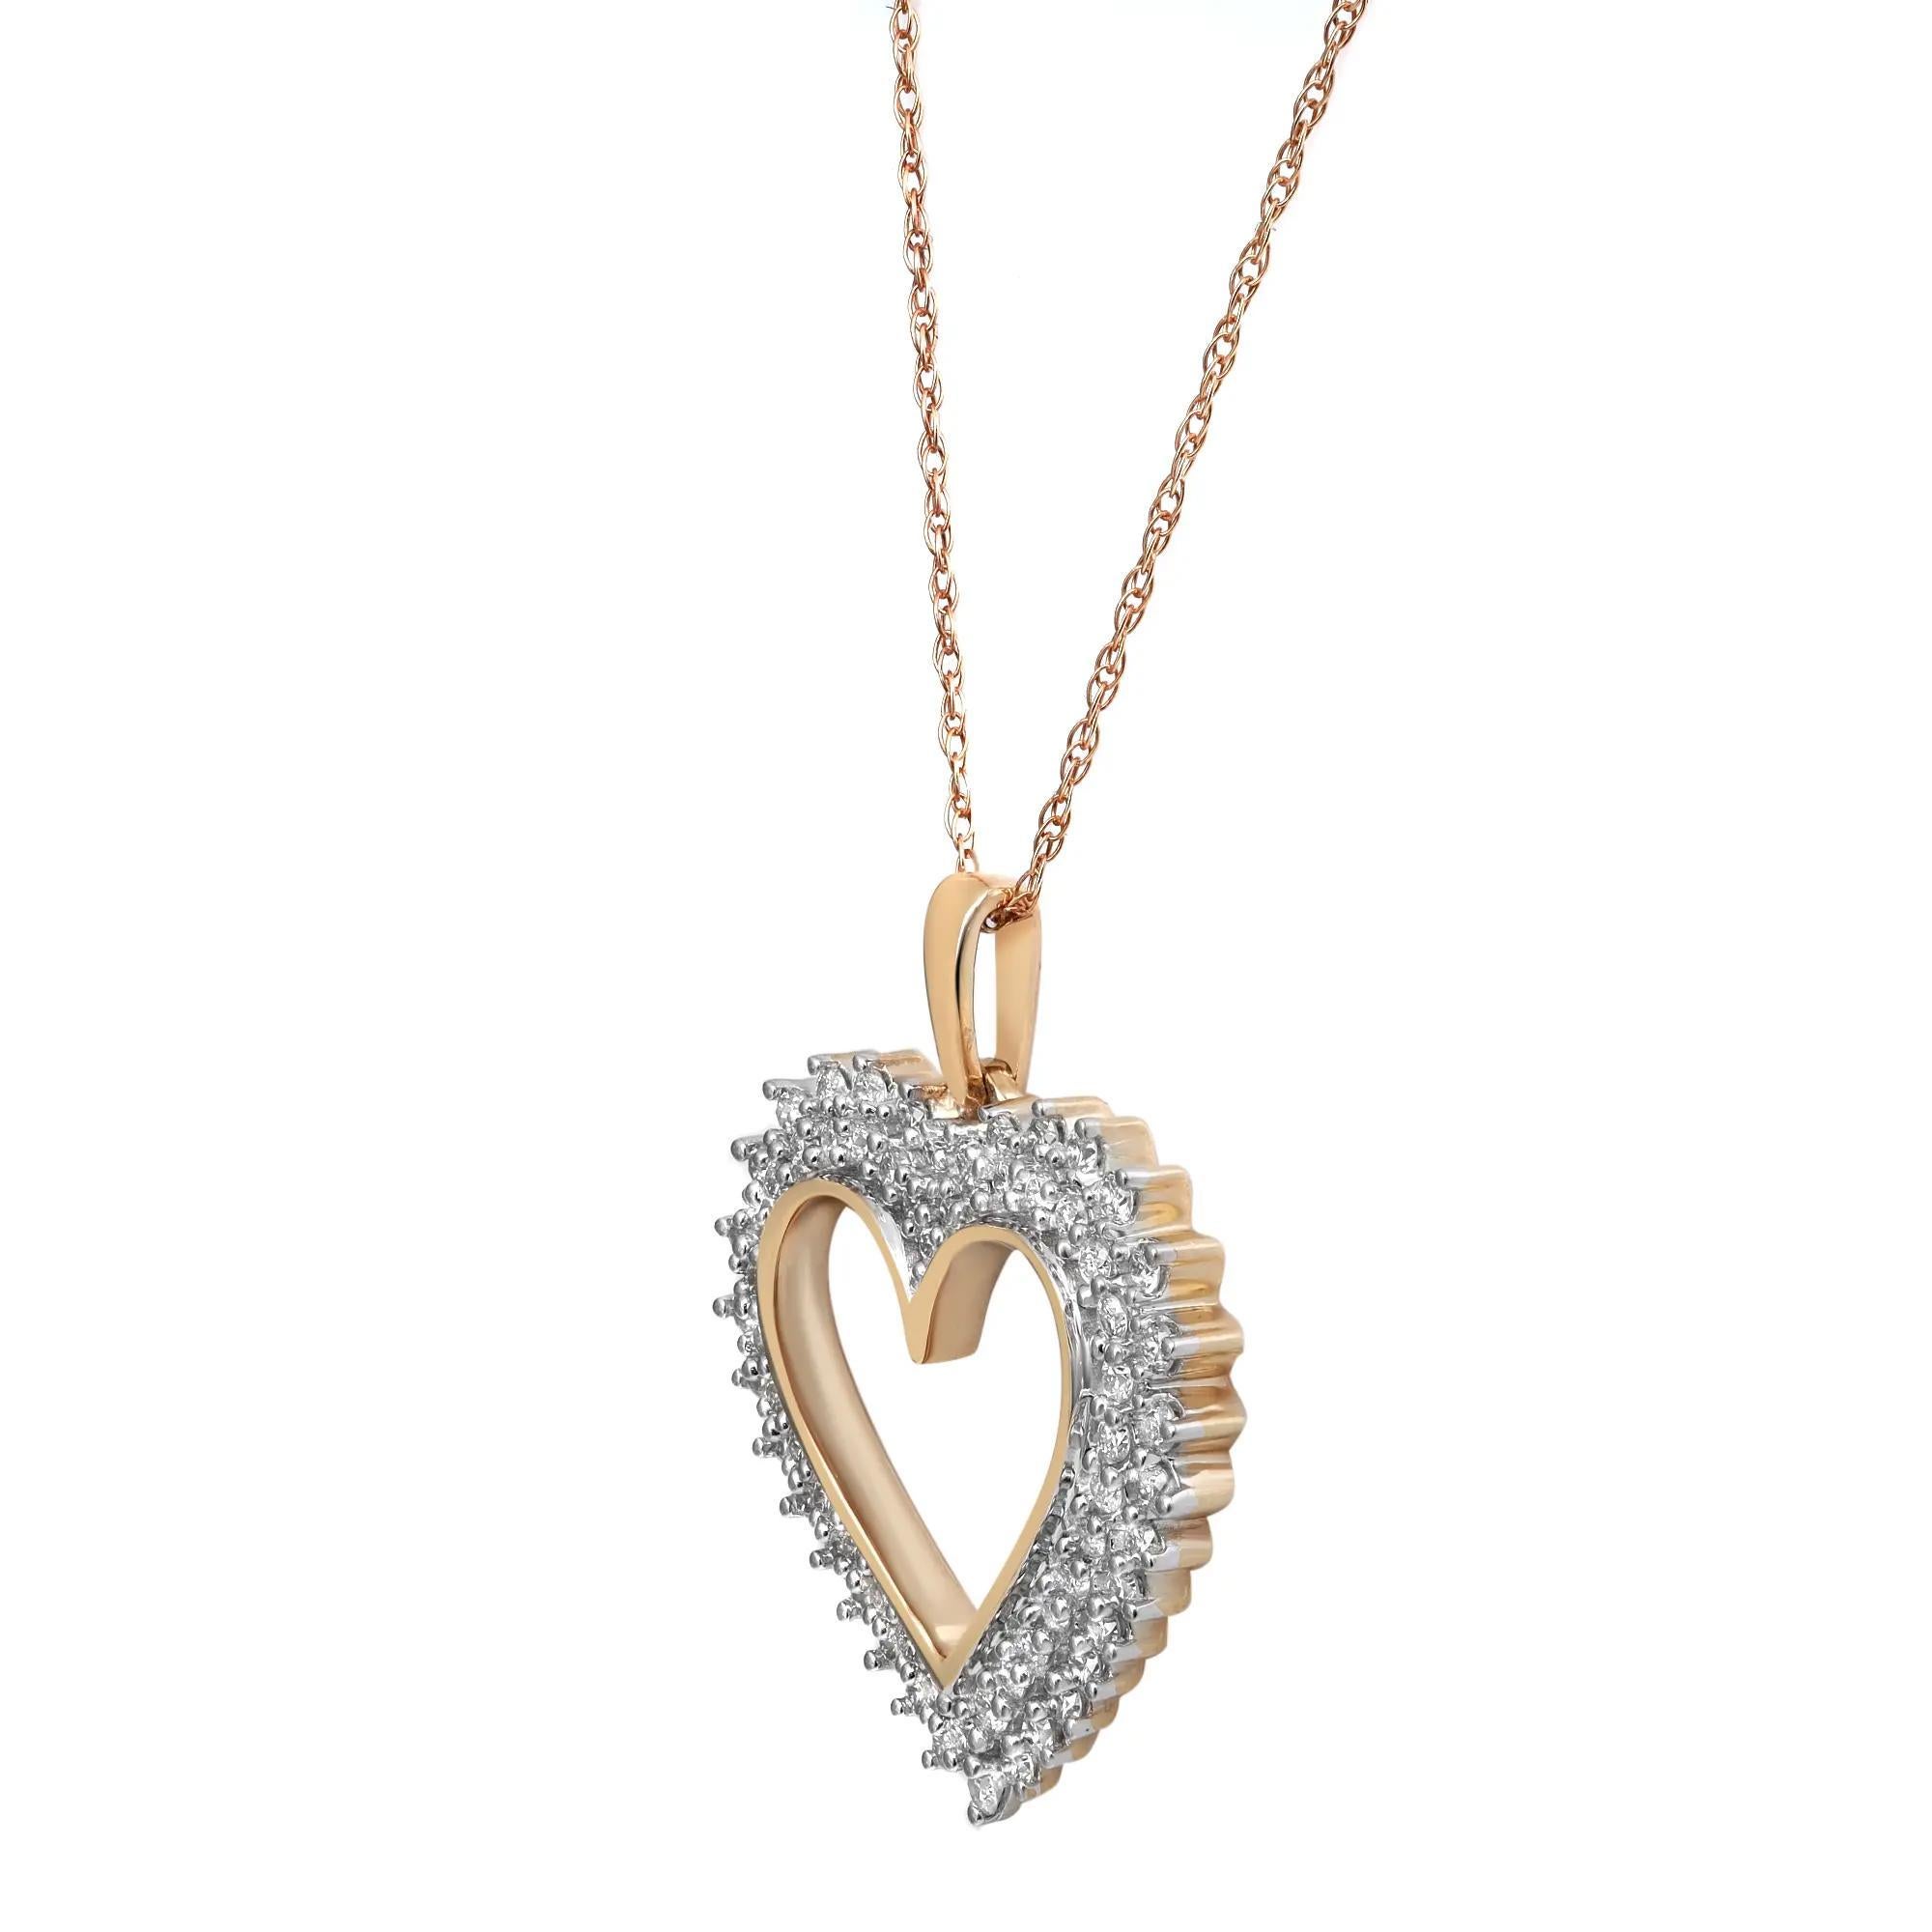 This diamond heart pendant features round brilliant cut diamonds encrusted in prong setting in an open heart design. Crafted in 14K yellow gold. Come with 18 inches rope chain. Total diamond weight: 0.50 carat. Diamond color H-I and VS-SI clarity.